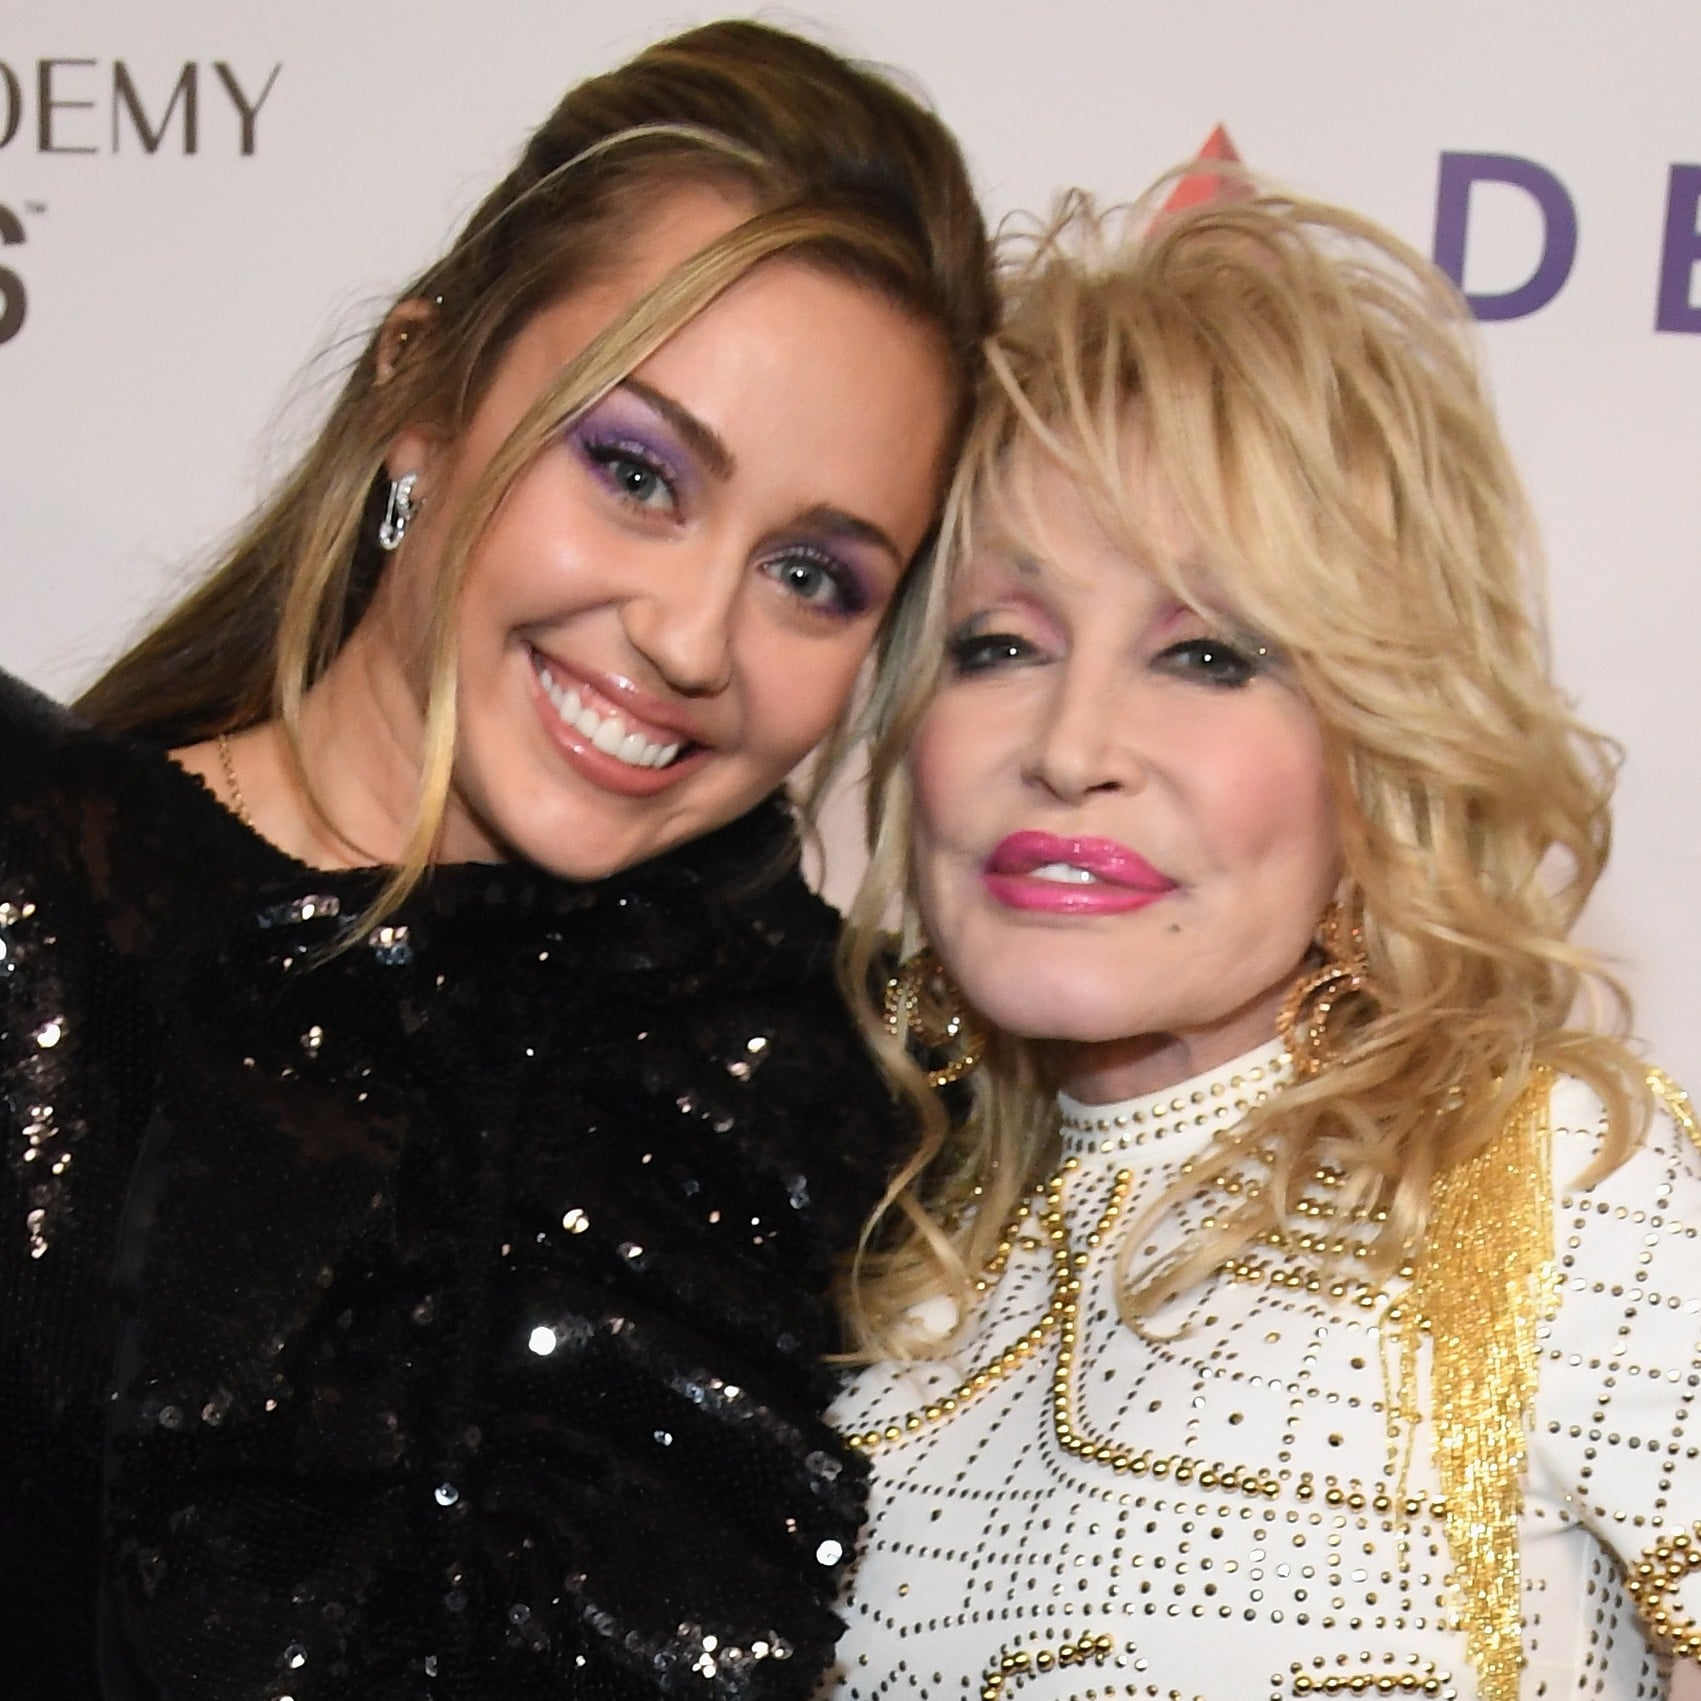 Is Miley Cyrus Related to Dolly Parton?